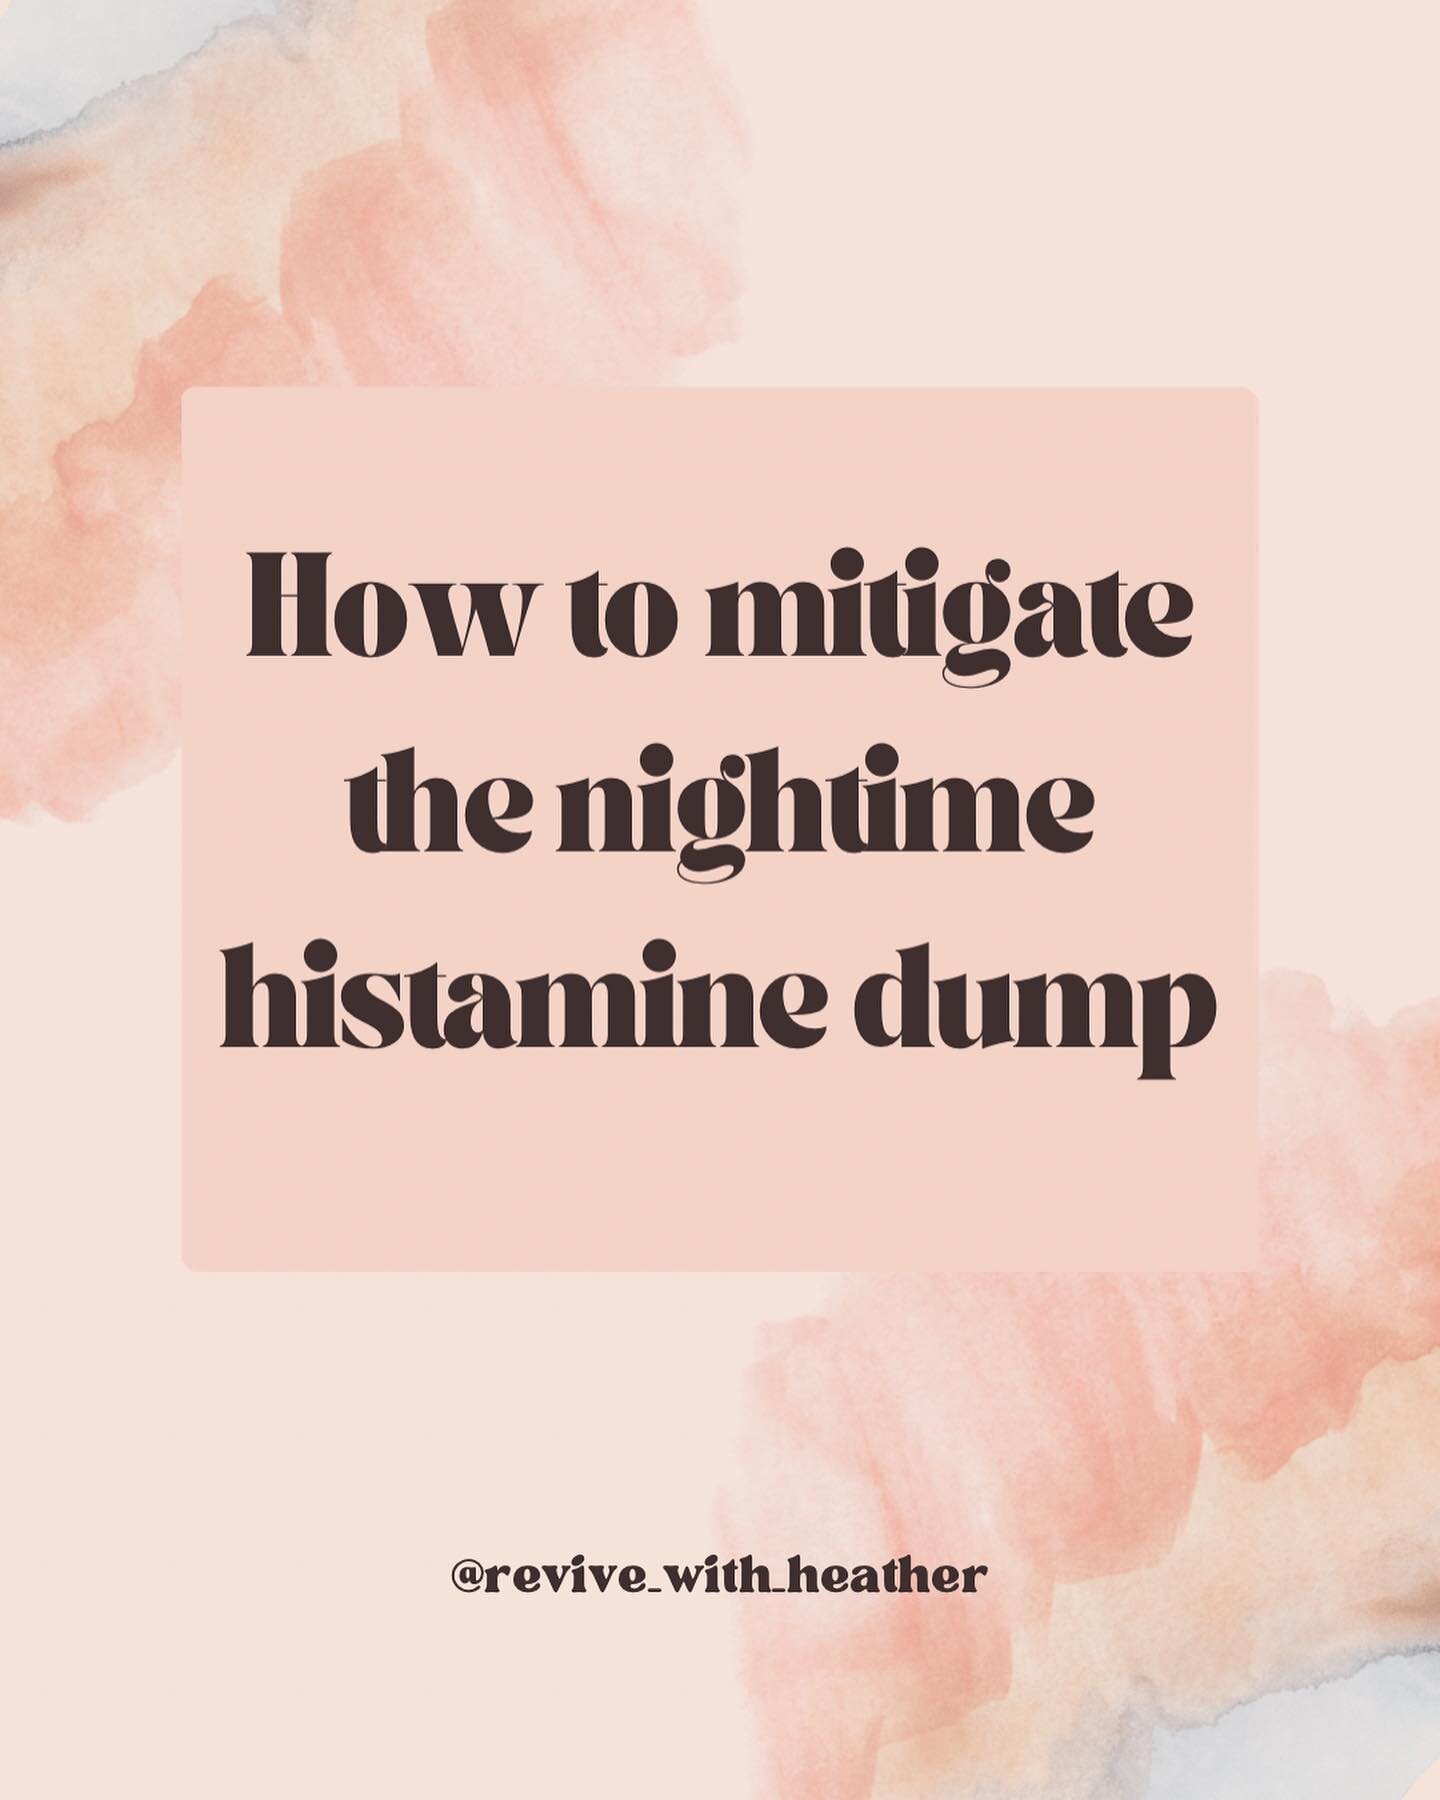 Do you struggle with high histamine at night?

That might look like

- waking up with histamine symptoms like hives, swelling, sinus congestion
-trouble falling asleep or waking up at 1-3am
-anxiety, racing thoughts
-skin itching, eczema flares

For 